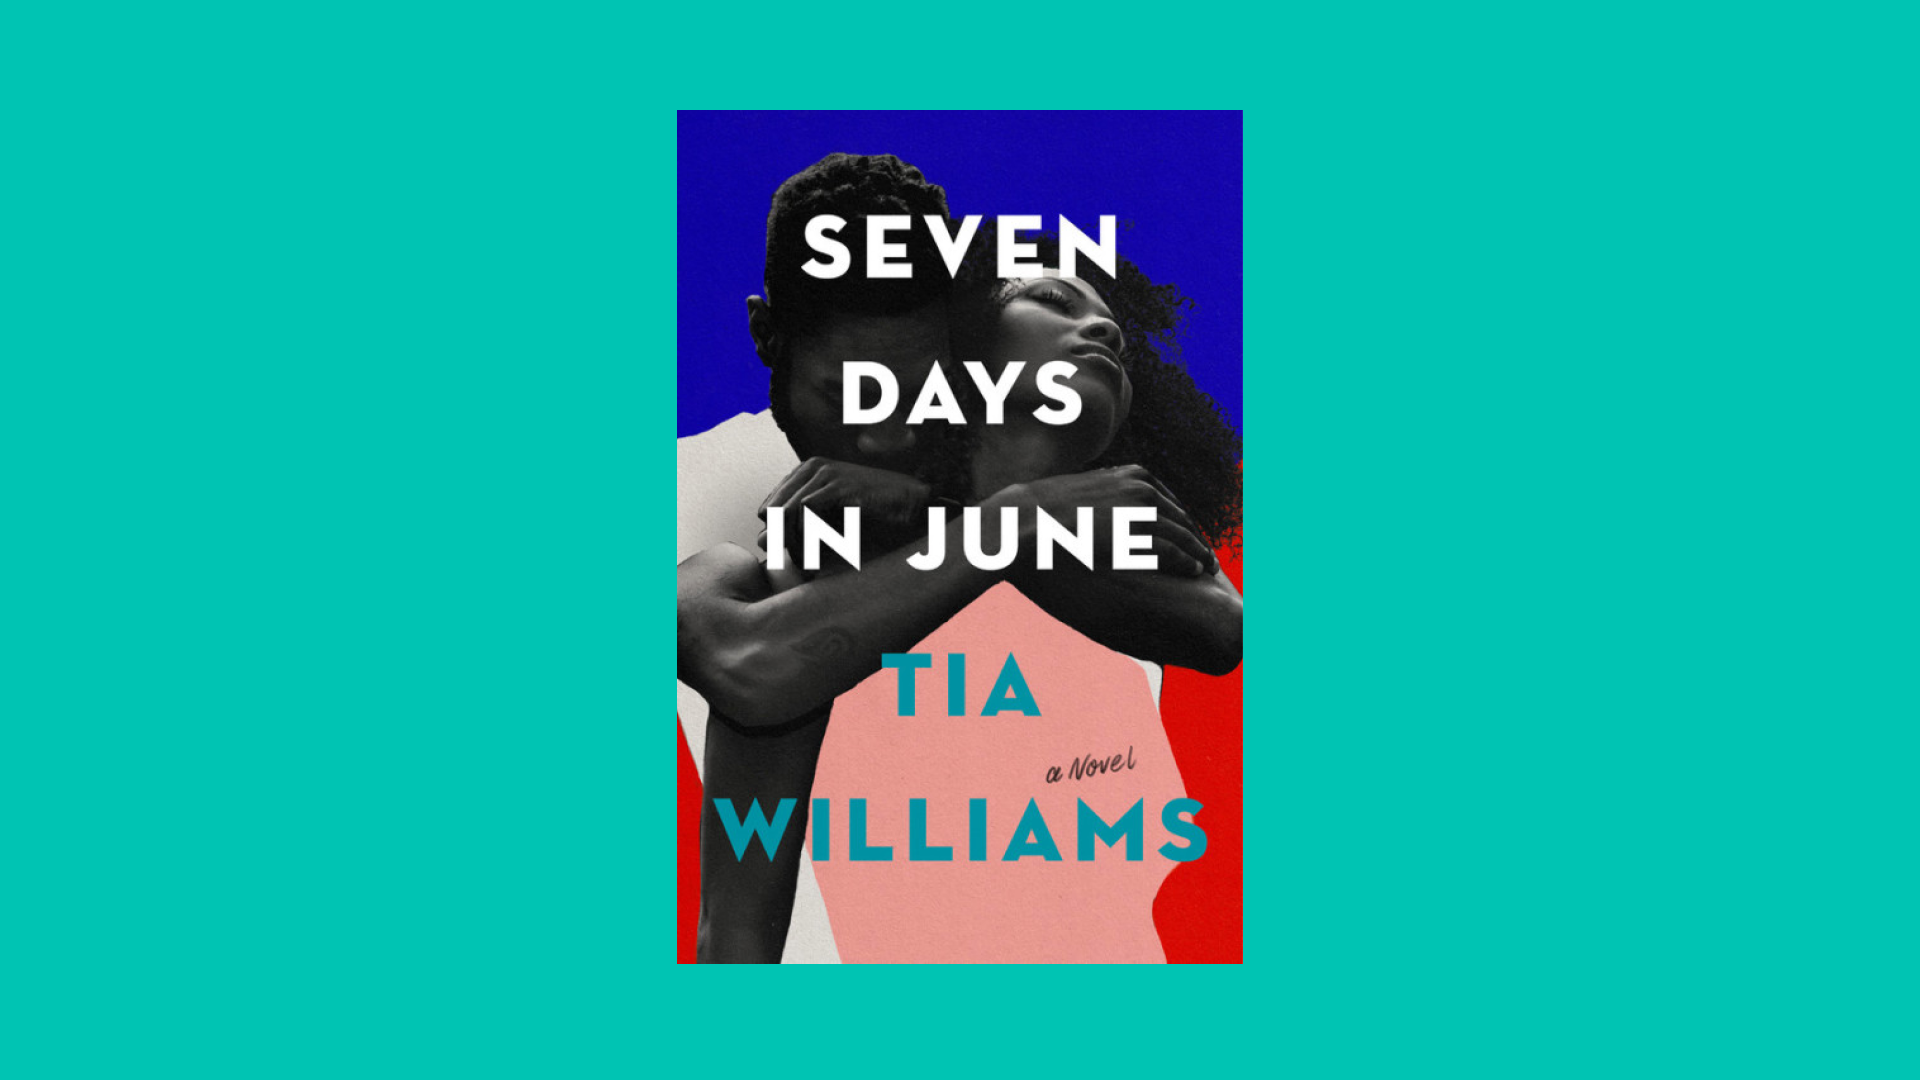 “Seven Days in June” by Tia Williams 